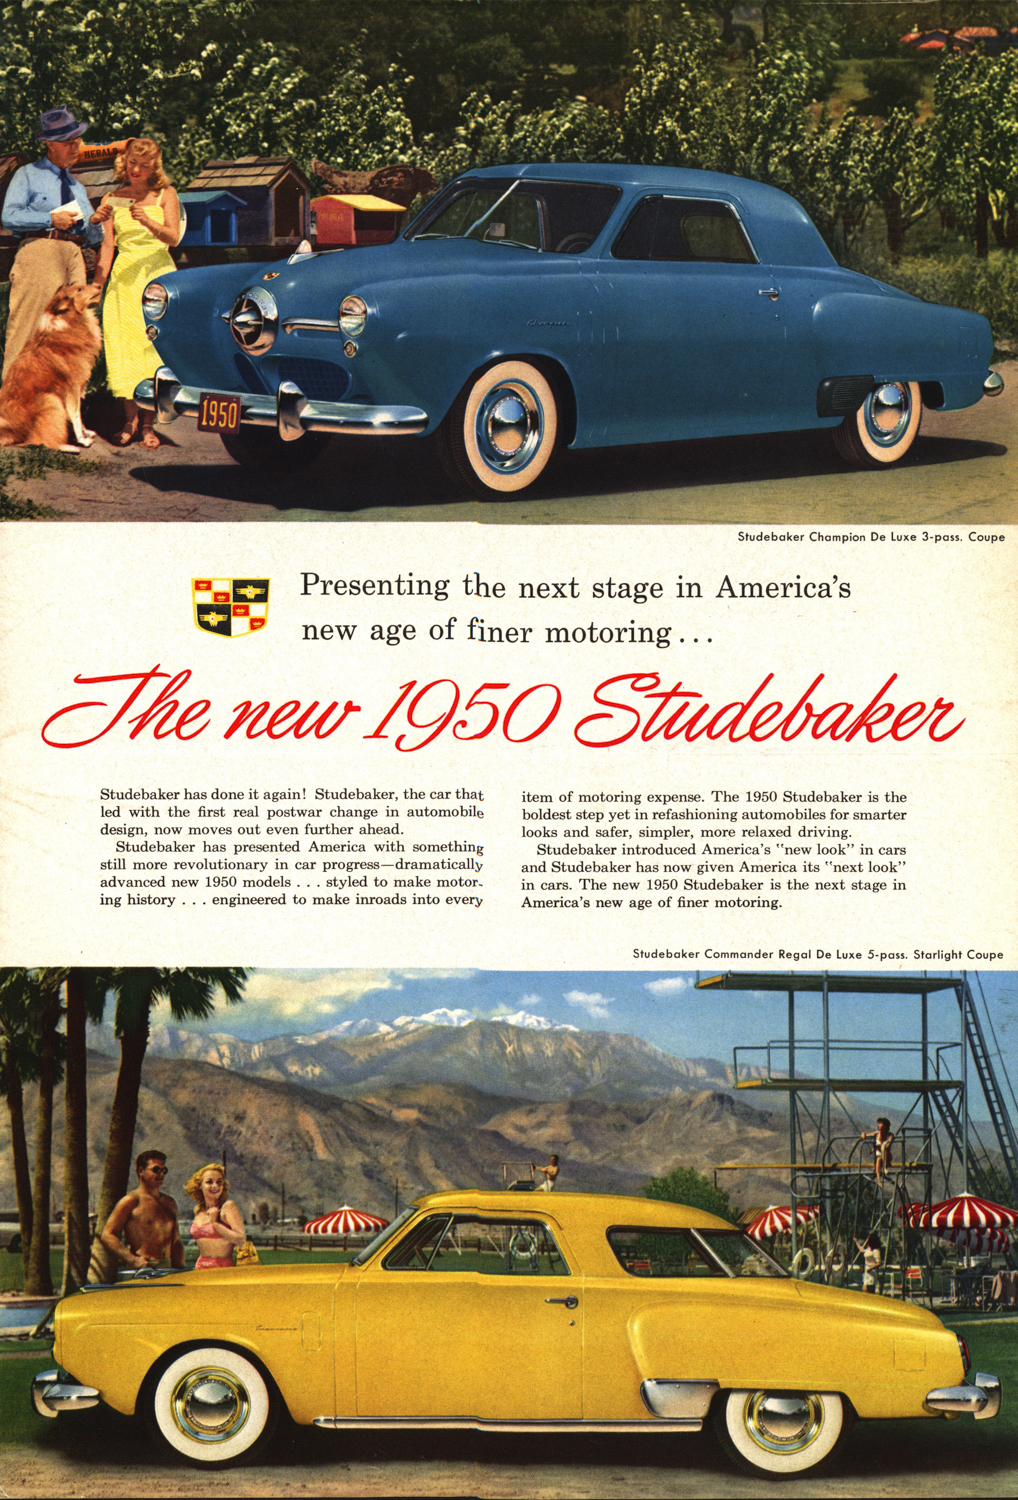 Studebaker surprised the market again in 1950 with its "Bullet Nose" line of cars. 